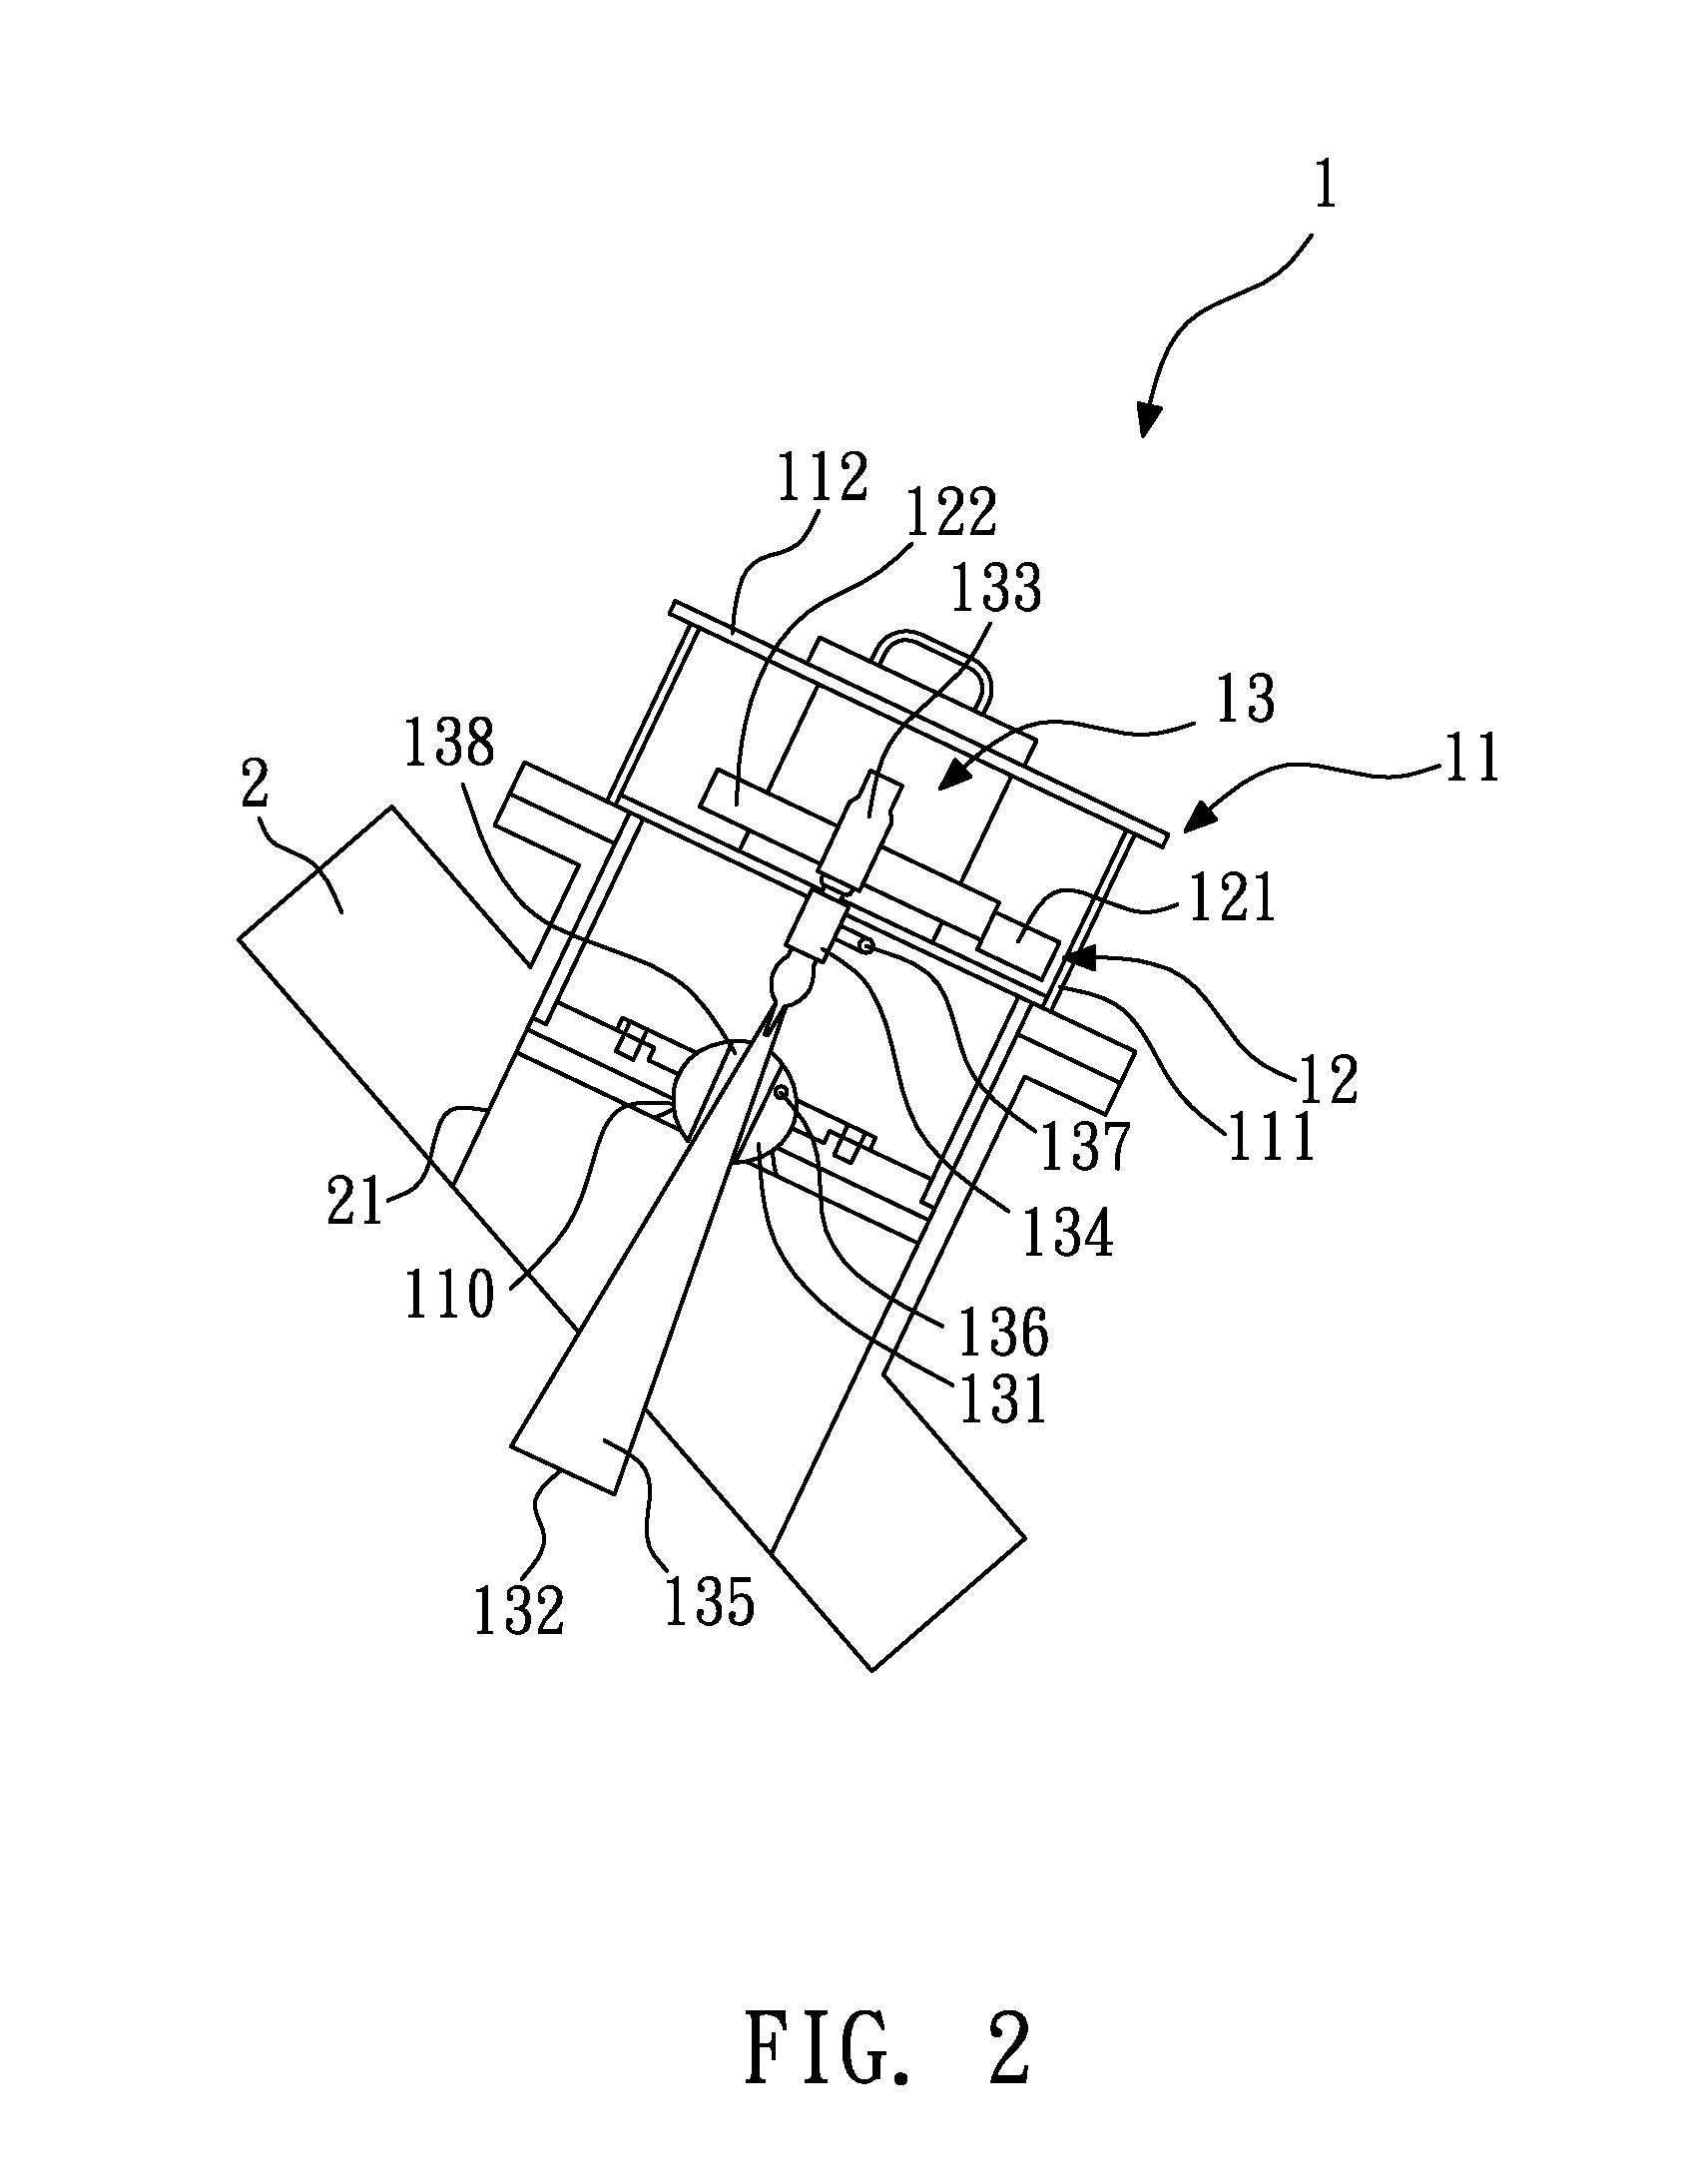 Resident measurement system for charge level of blast furnace